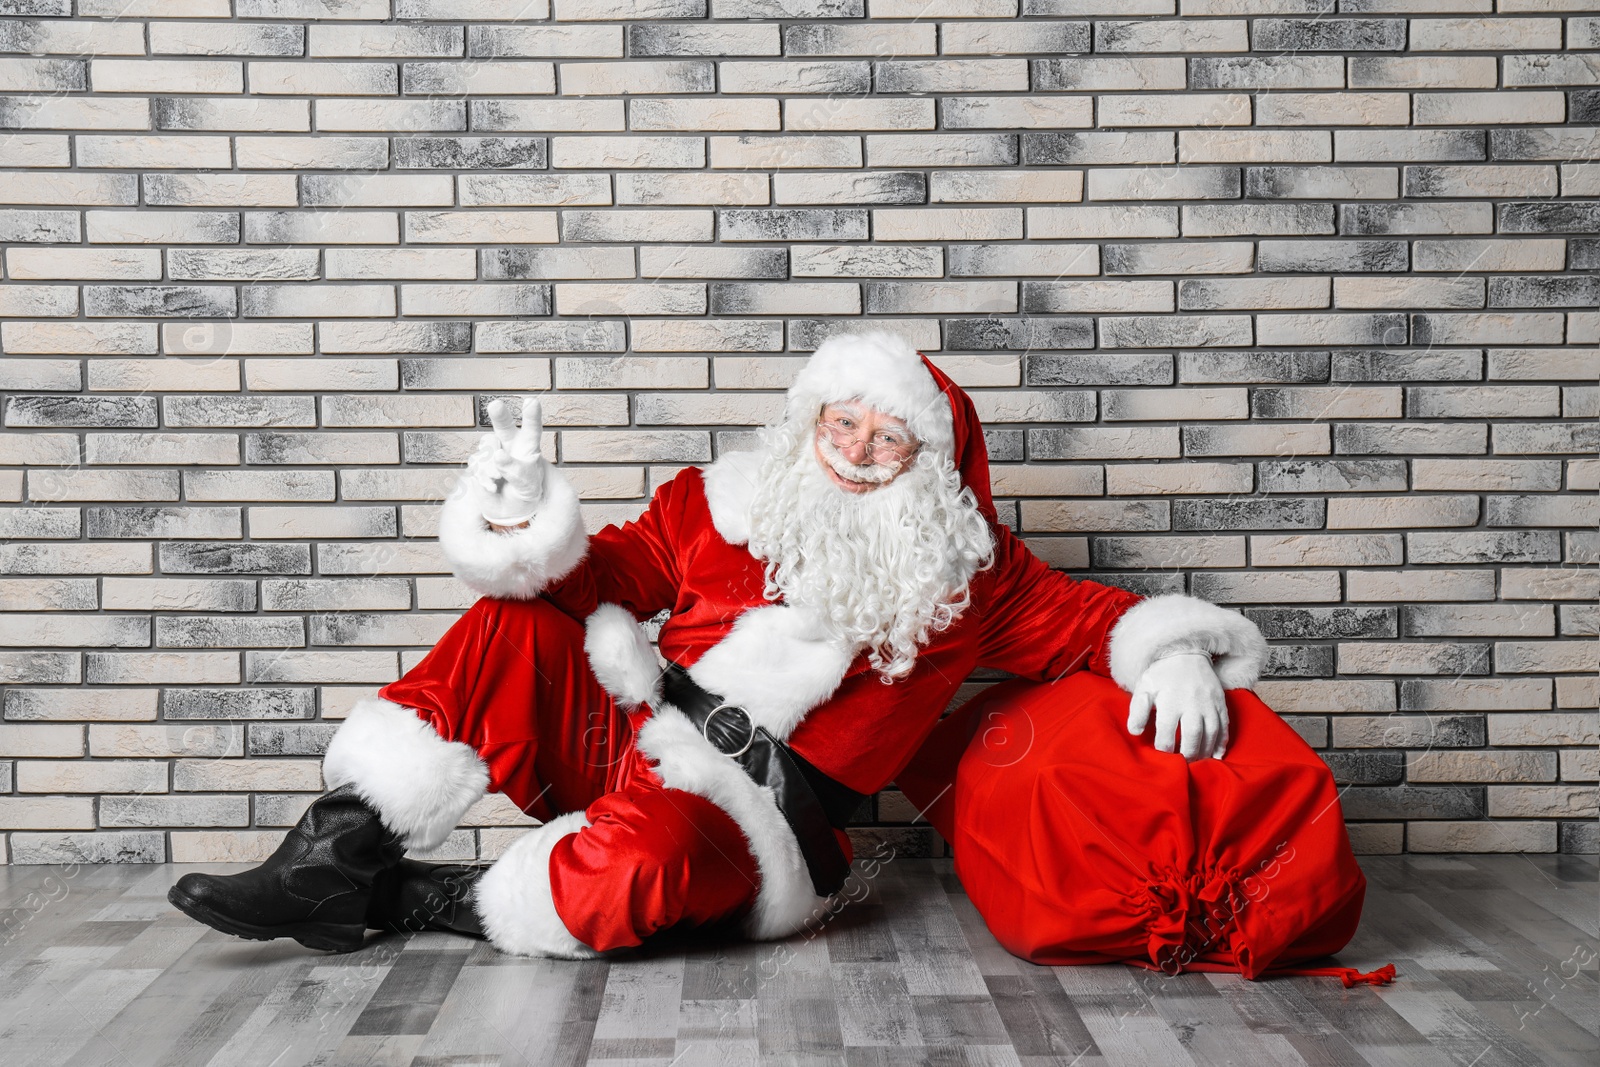 Photo of Authentic Santa Claus with big red bag full of gifts sitting on floor near brick wall